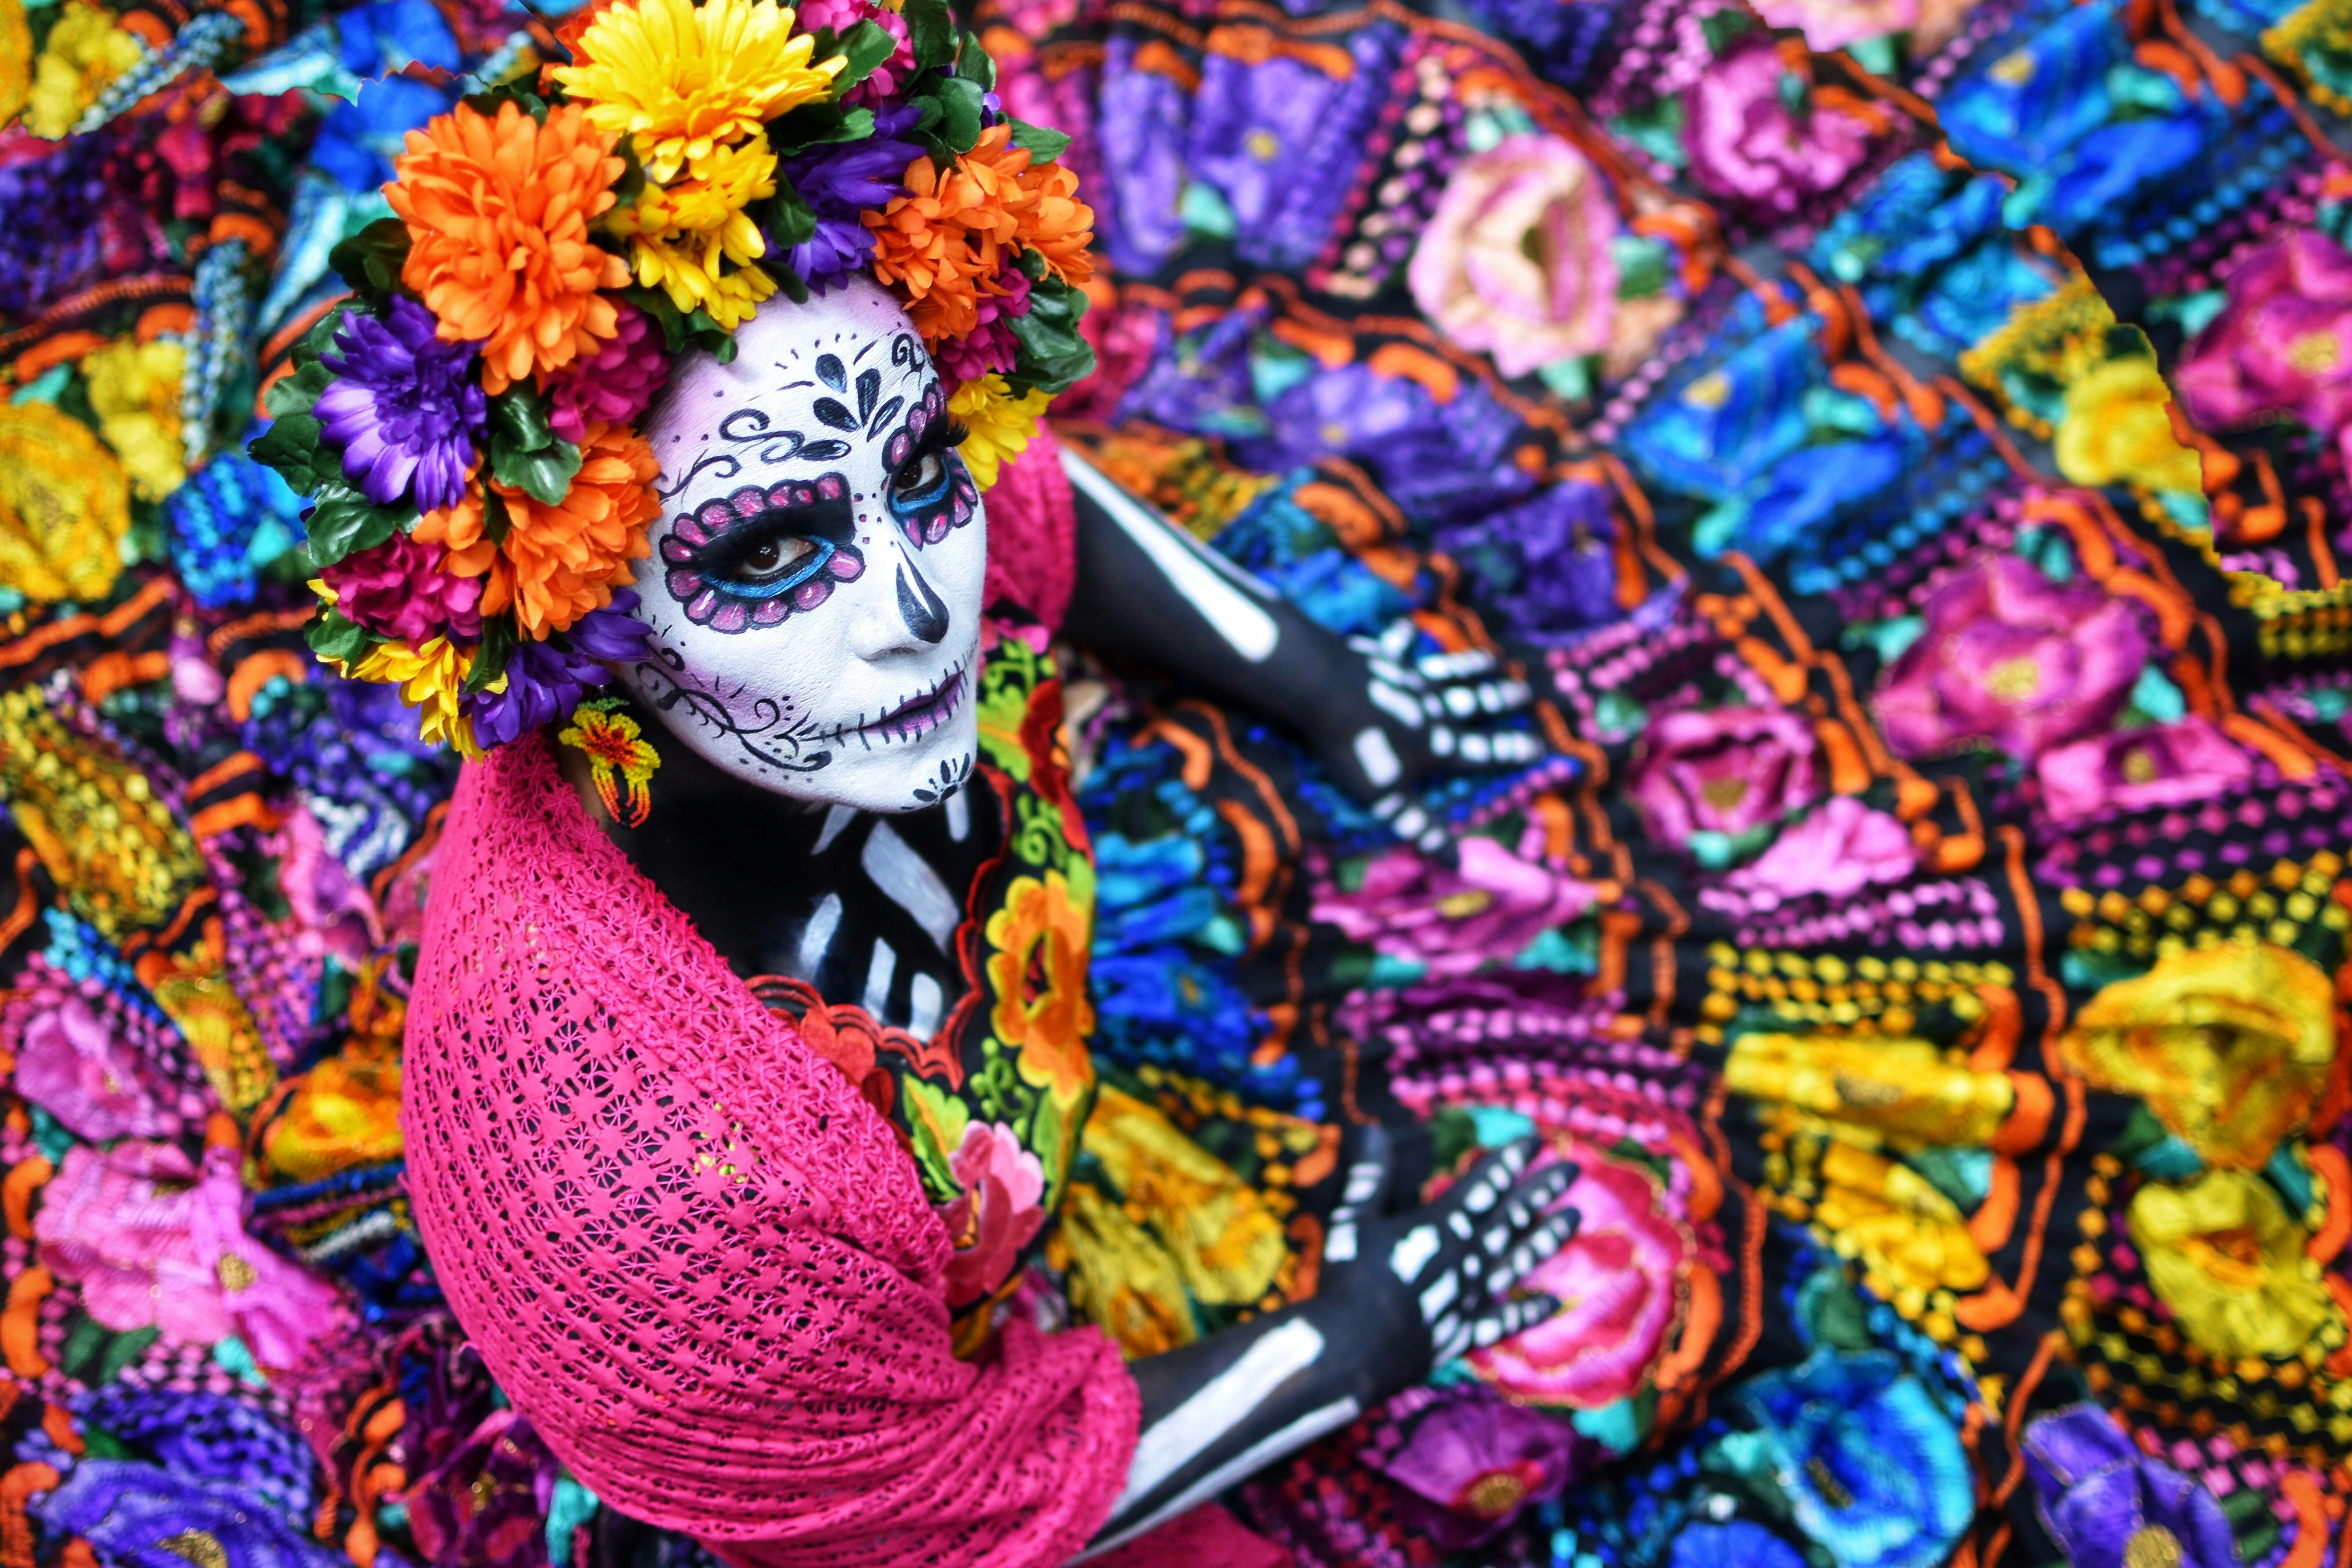 A woman dressed as a Catrina - one of the most recognisable symbols of the Day of the Dead celebrations in Mexico